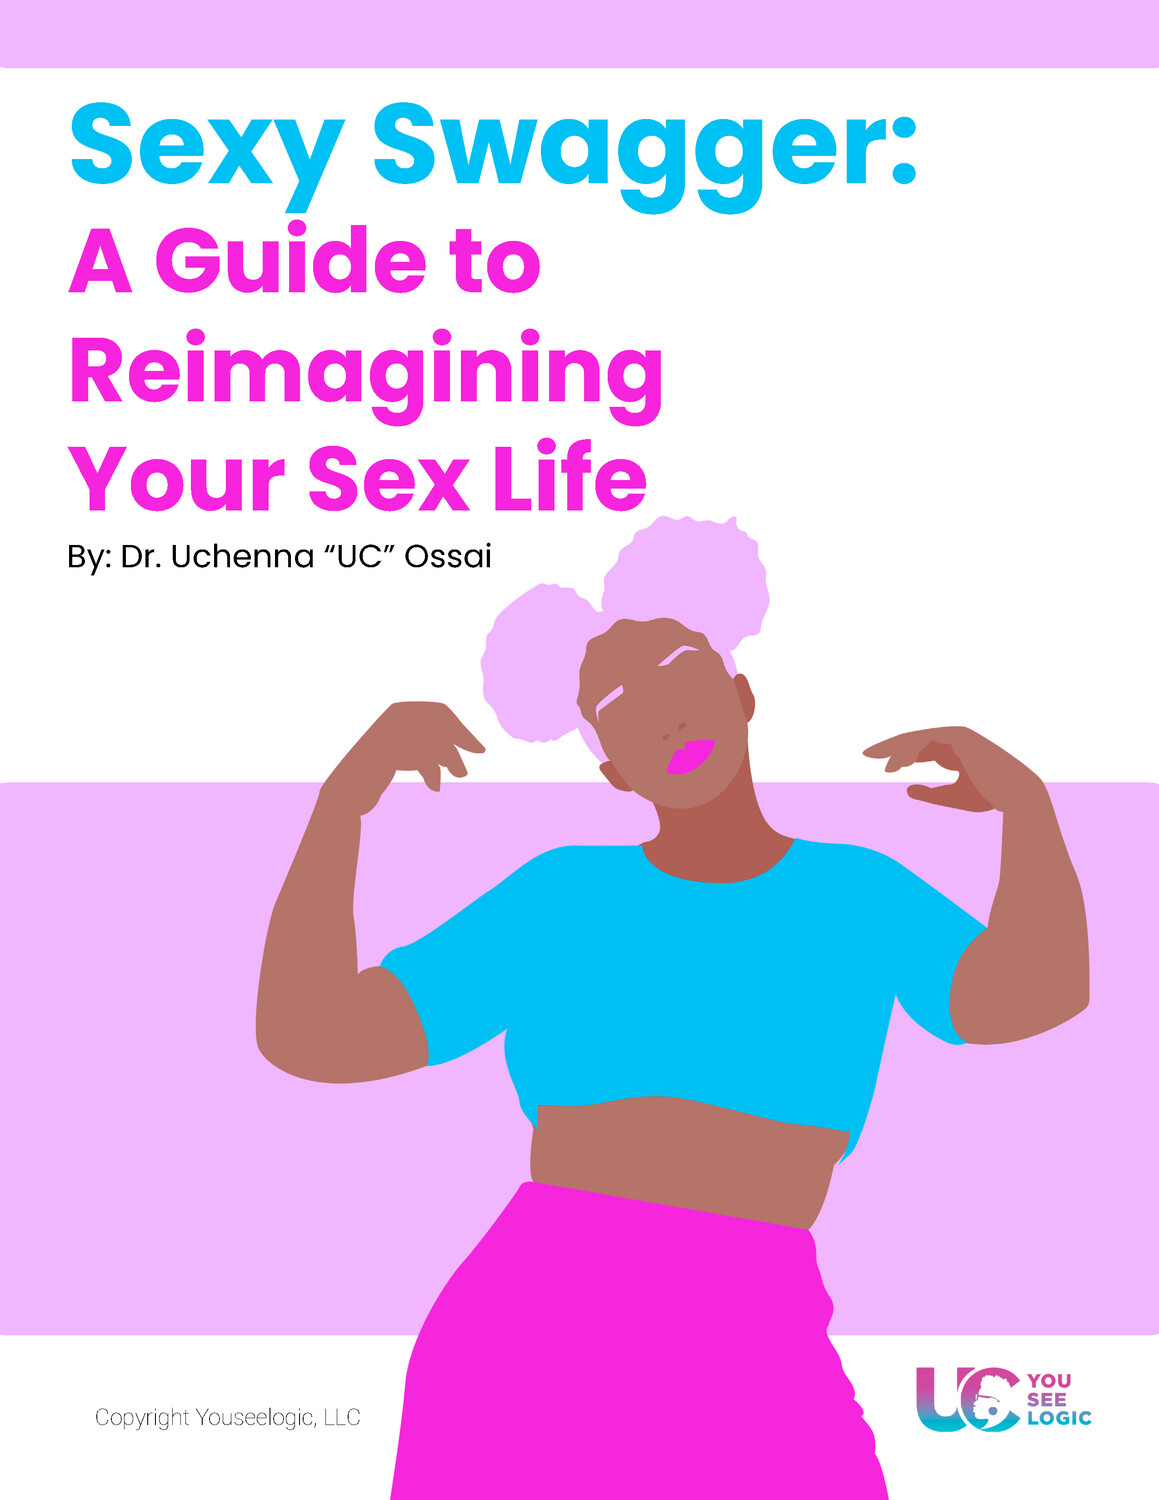 Sexy Swagger: A Guide to Reimagining Your Sex Life